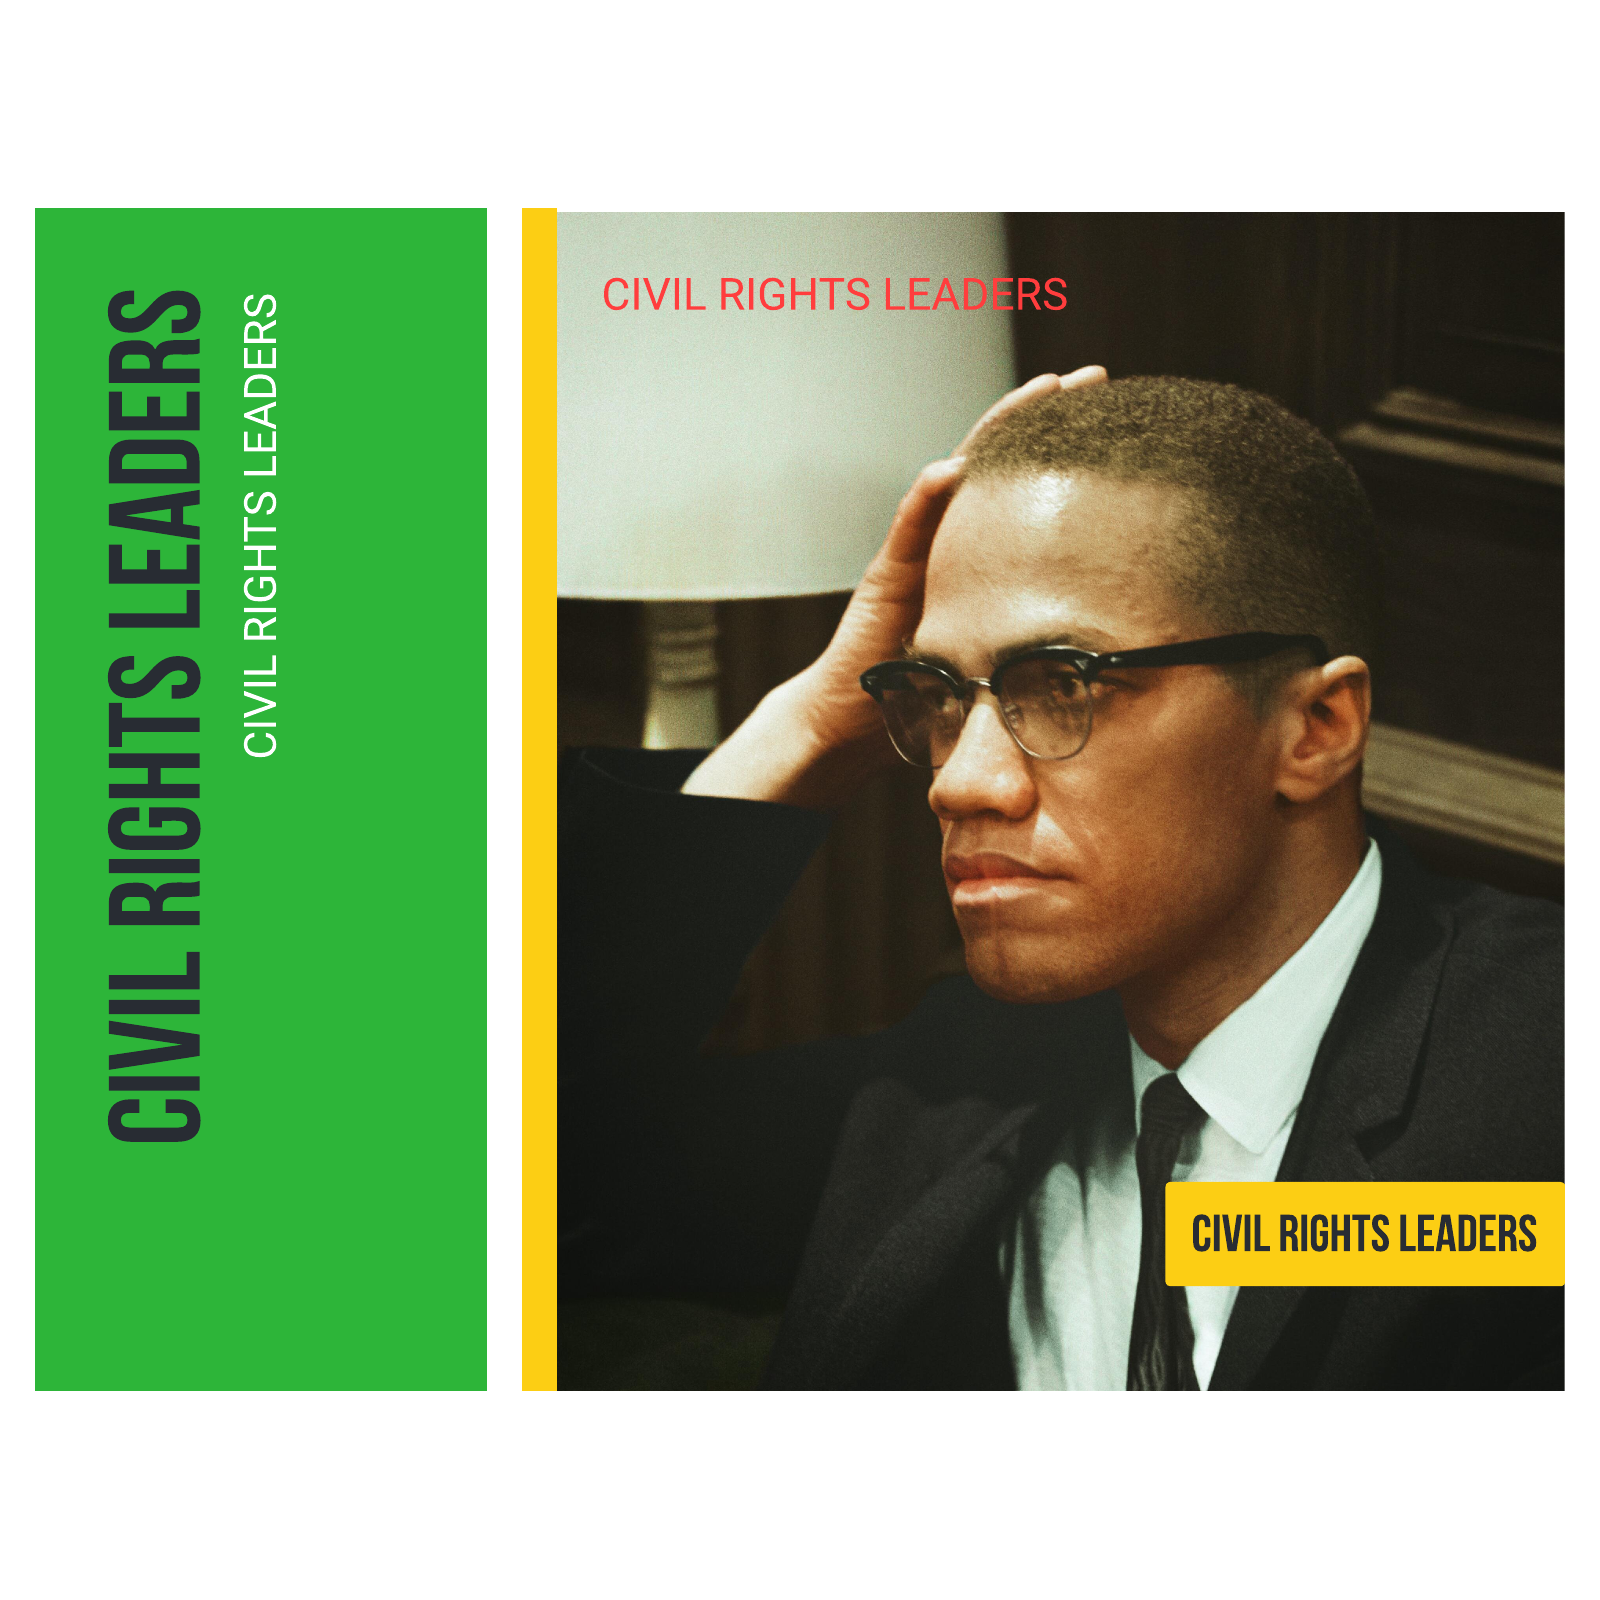 Civil rights leaders book  example